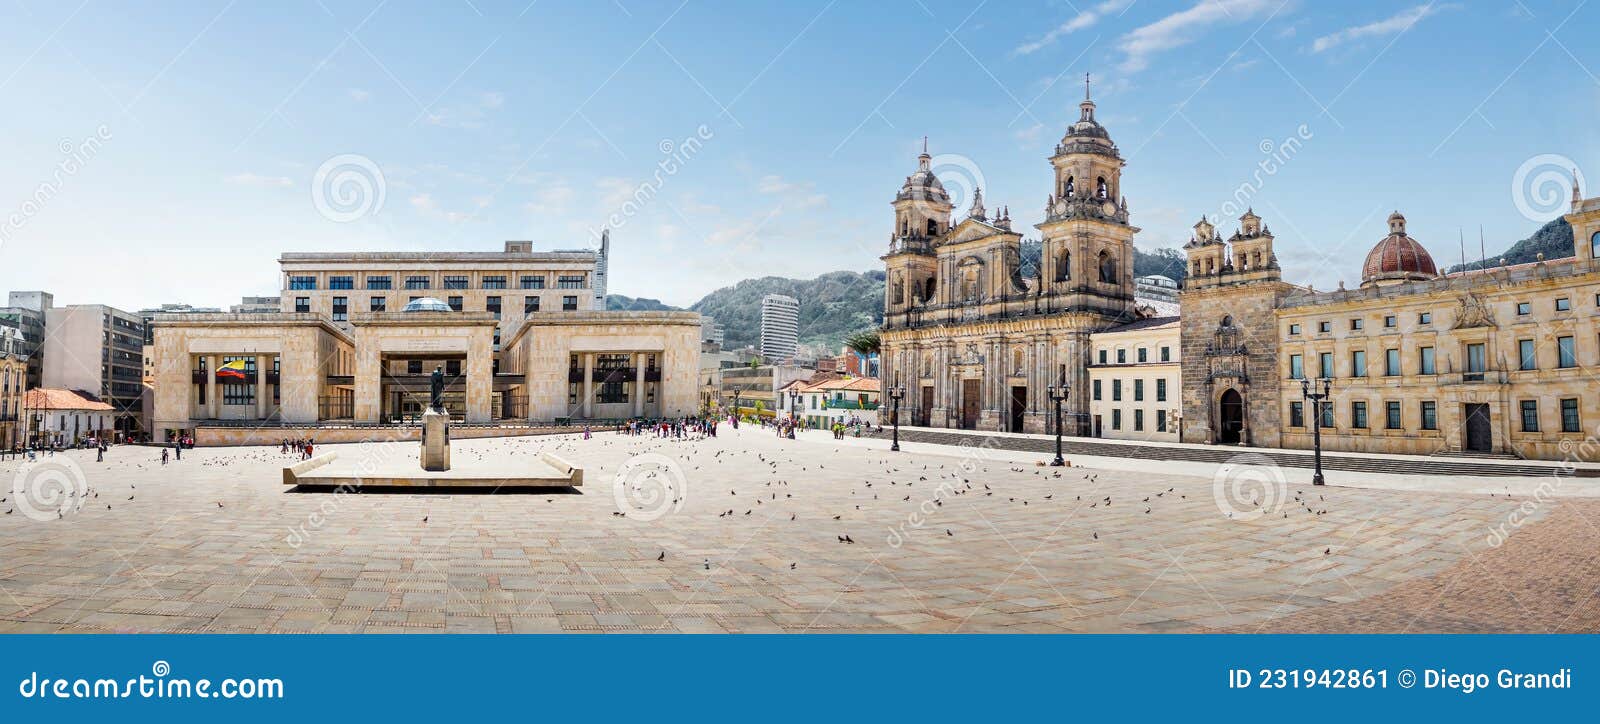 panoramic view of bolivar square with the cathedral and the colombian palace of justice - bogota, colombia